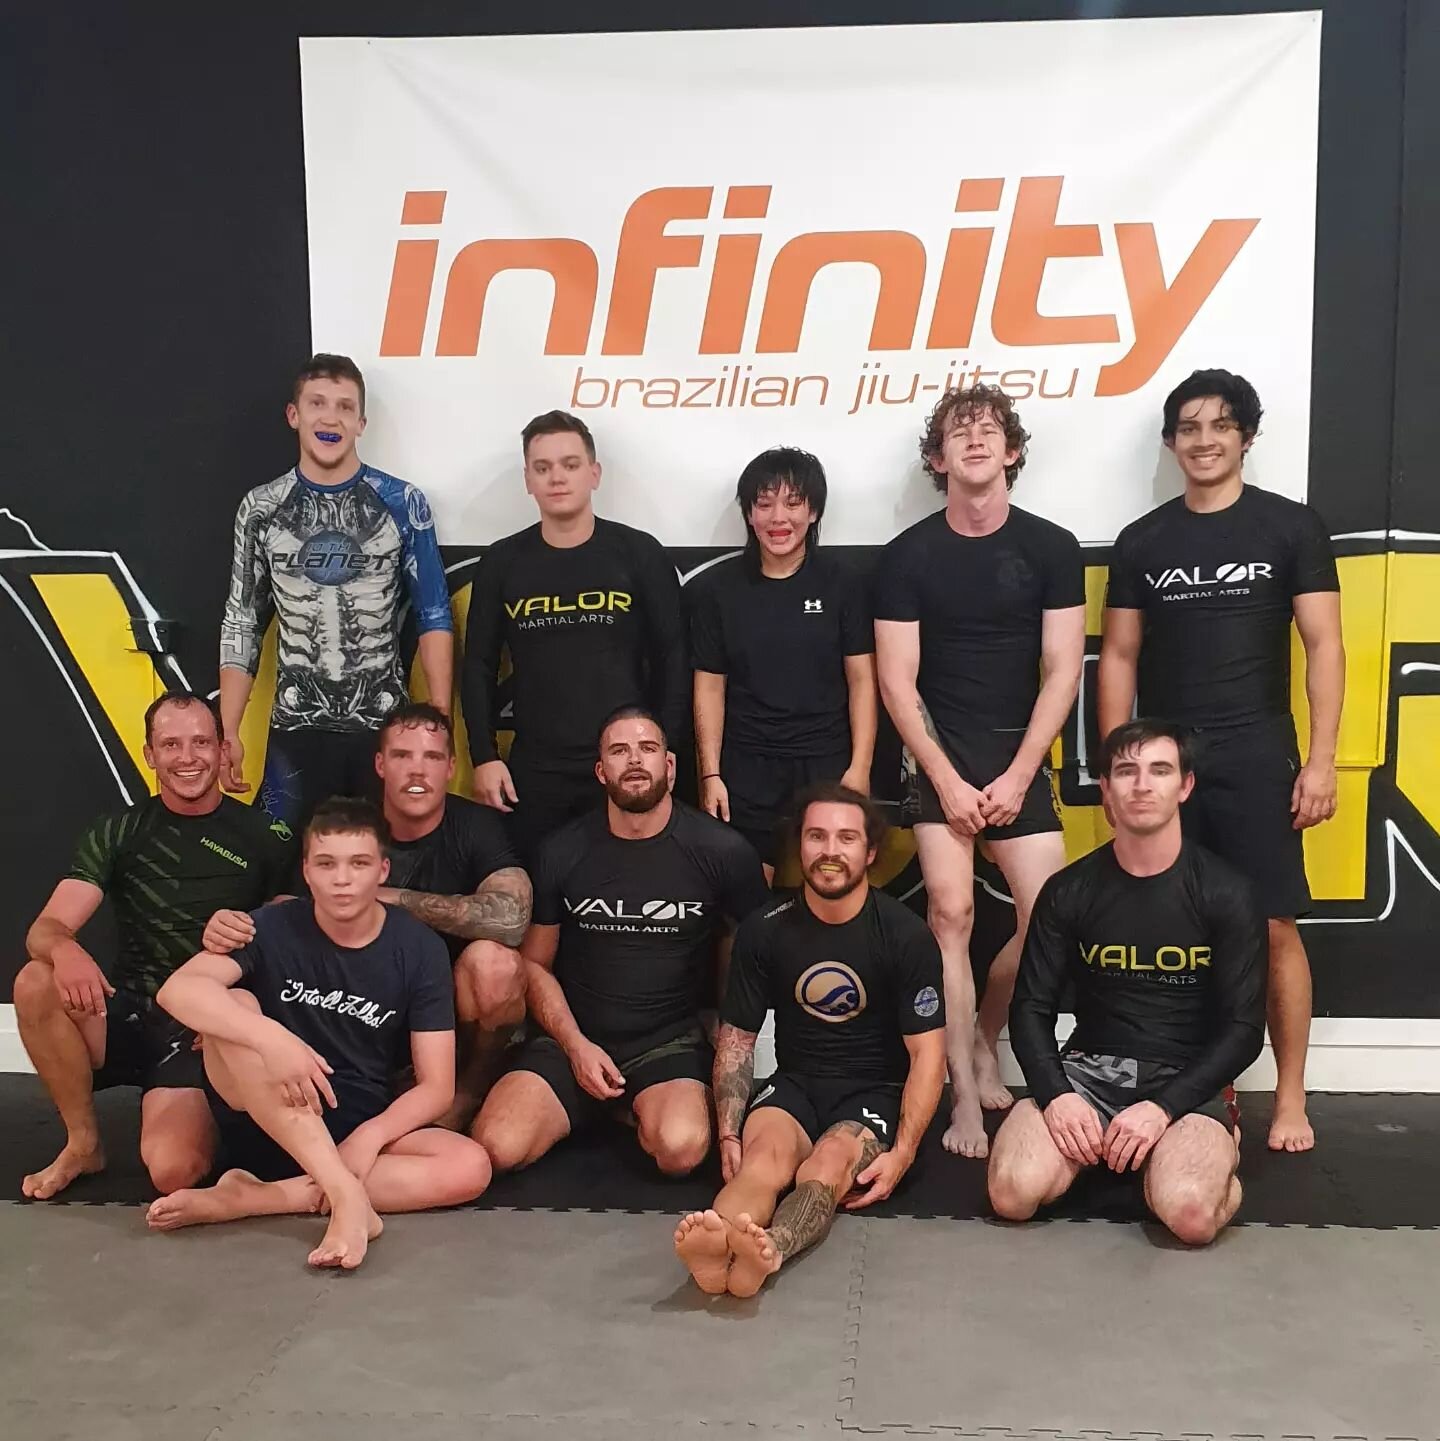 It's hump day but that doesn't mean you slack off ⚔

🔥 4.45pm Leg Locks
🔥 5.30pm Mixed Martial Arts

Valor offers a variety of different classes. 

◾ Mixed Martial Arts
◾ Brazilian Jiu Jitsu
◾ Muay Thai
◾ Wrestling

Challenge yourself today!

Conta